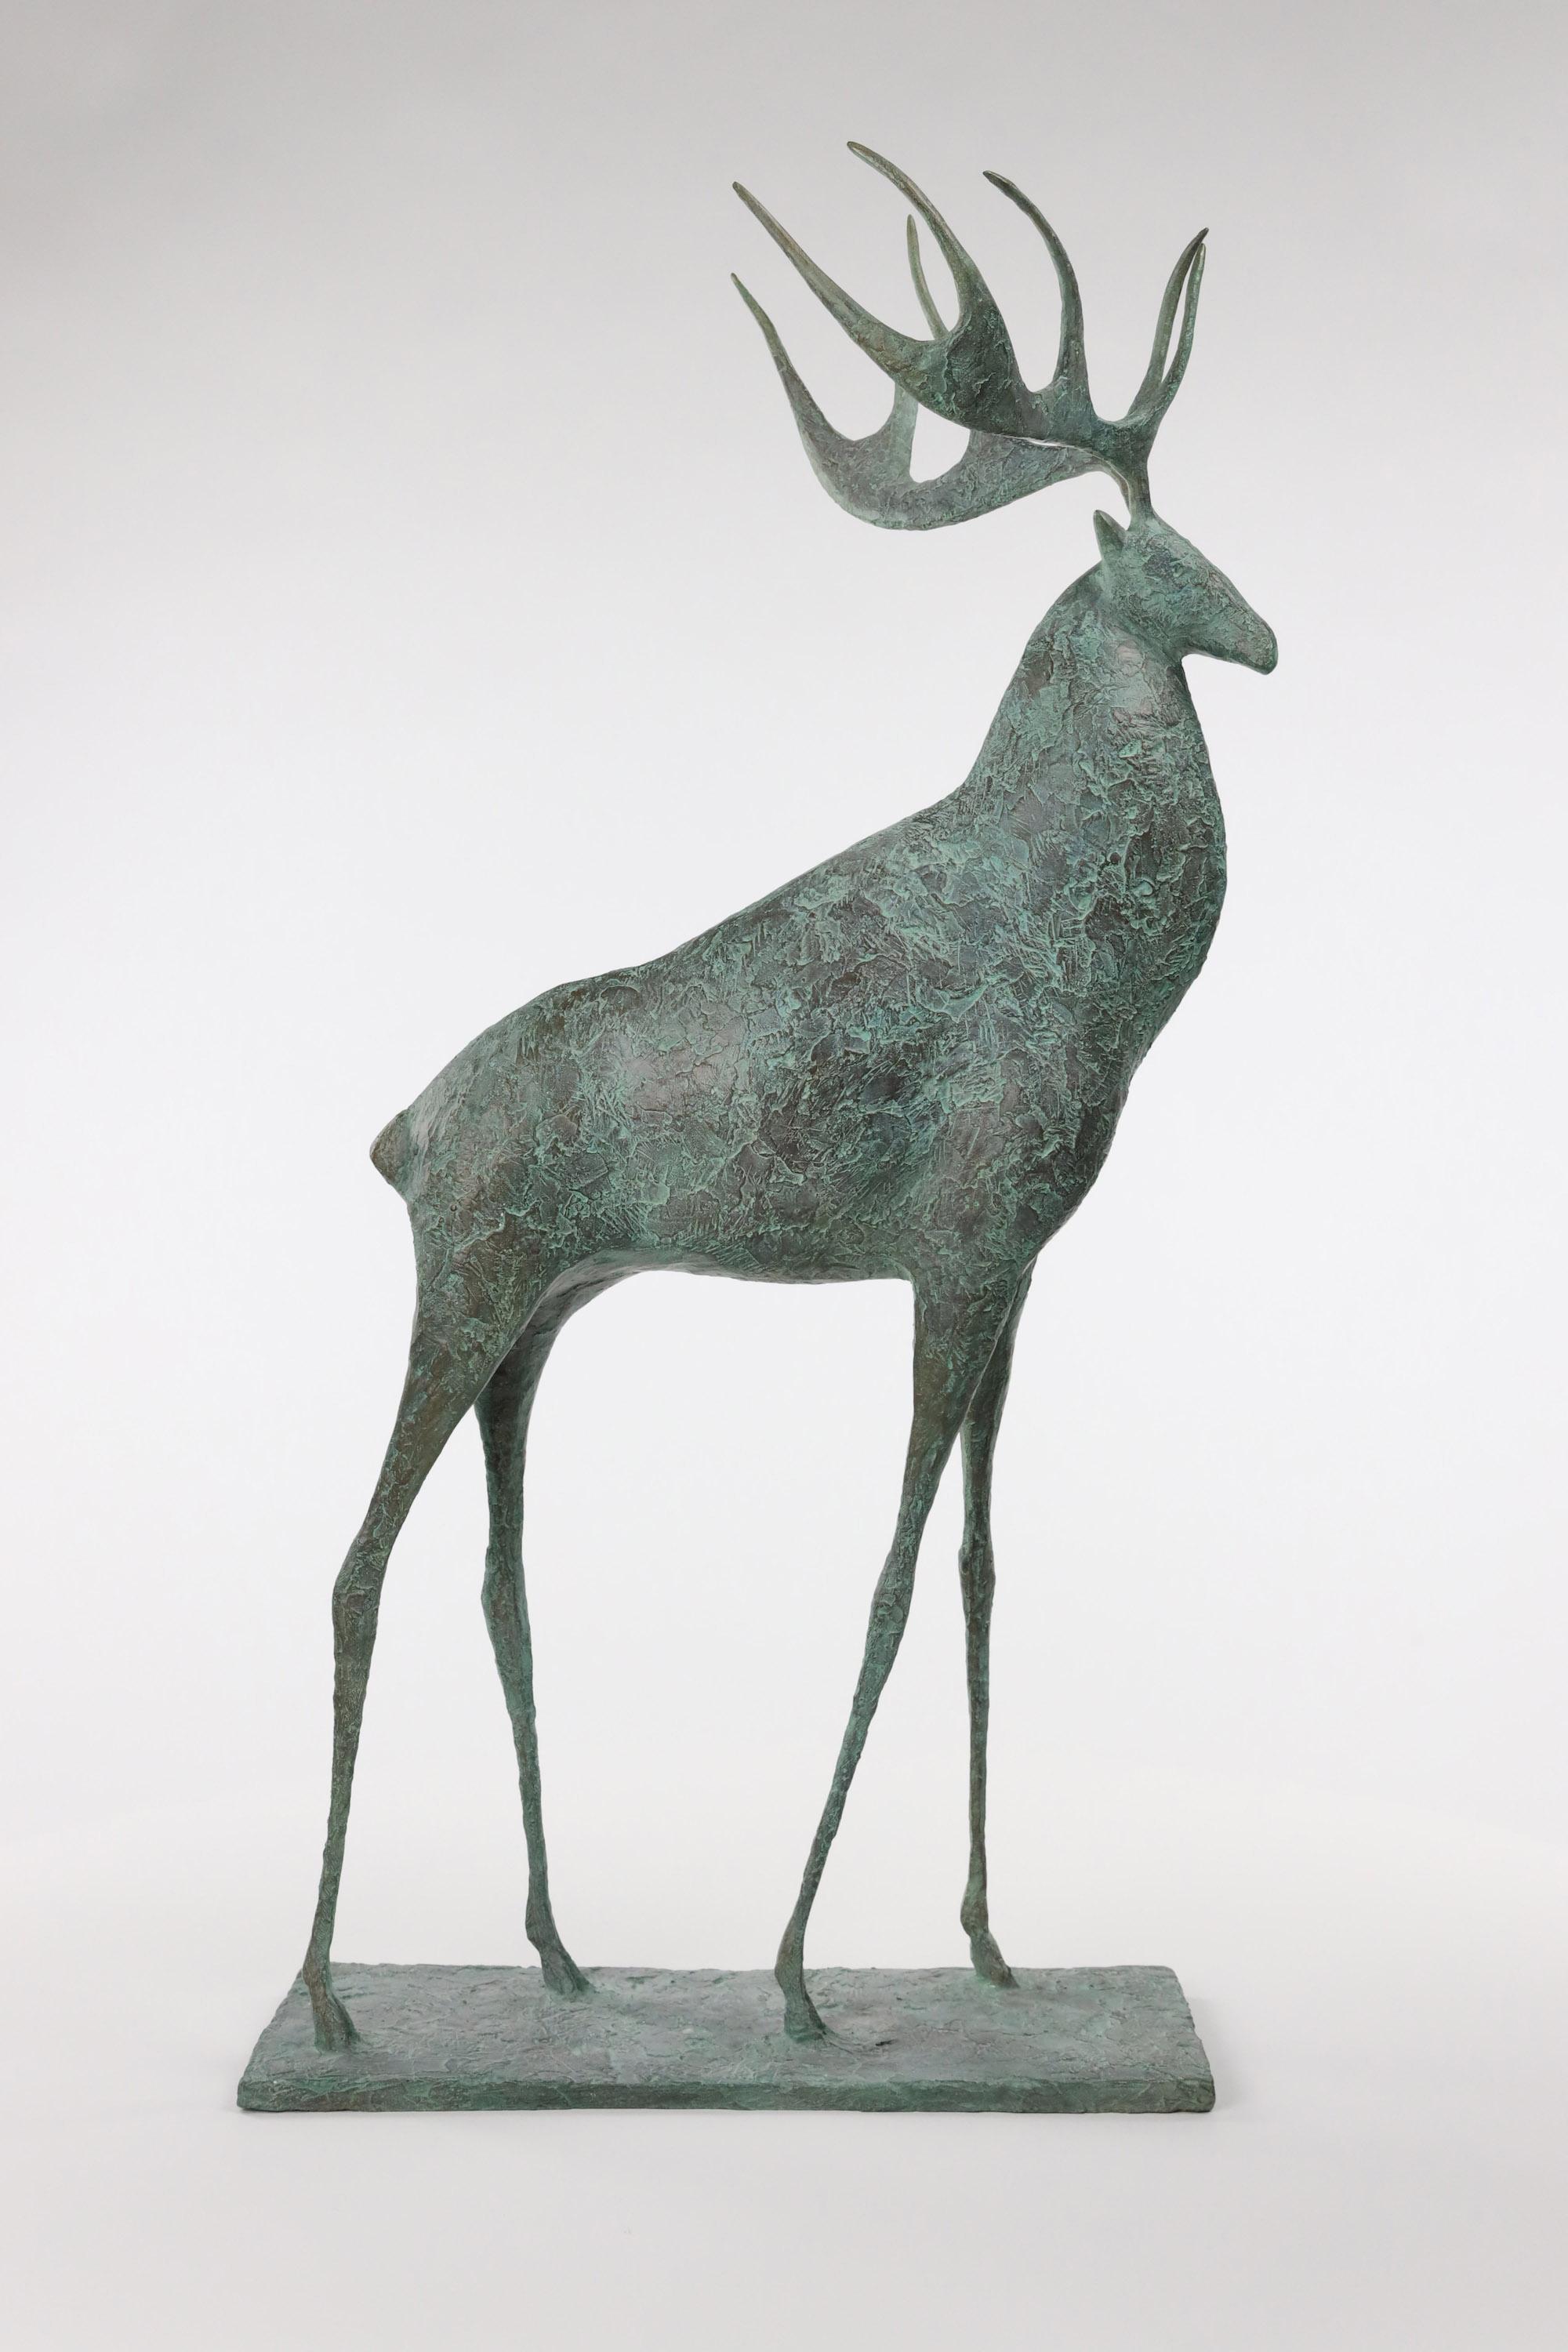 Stag II is a bronze sculpture by French contemporary artist Pierre Yermia, dimensions are 83 × 39 × 24 cm (32.7 × 15.4 × 9.4 in). The sculpture is signed and numbered, it is part of a limited edition of 8 editions + 4 artist’s proofs, and comes with